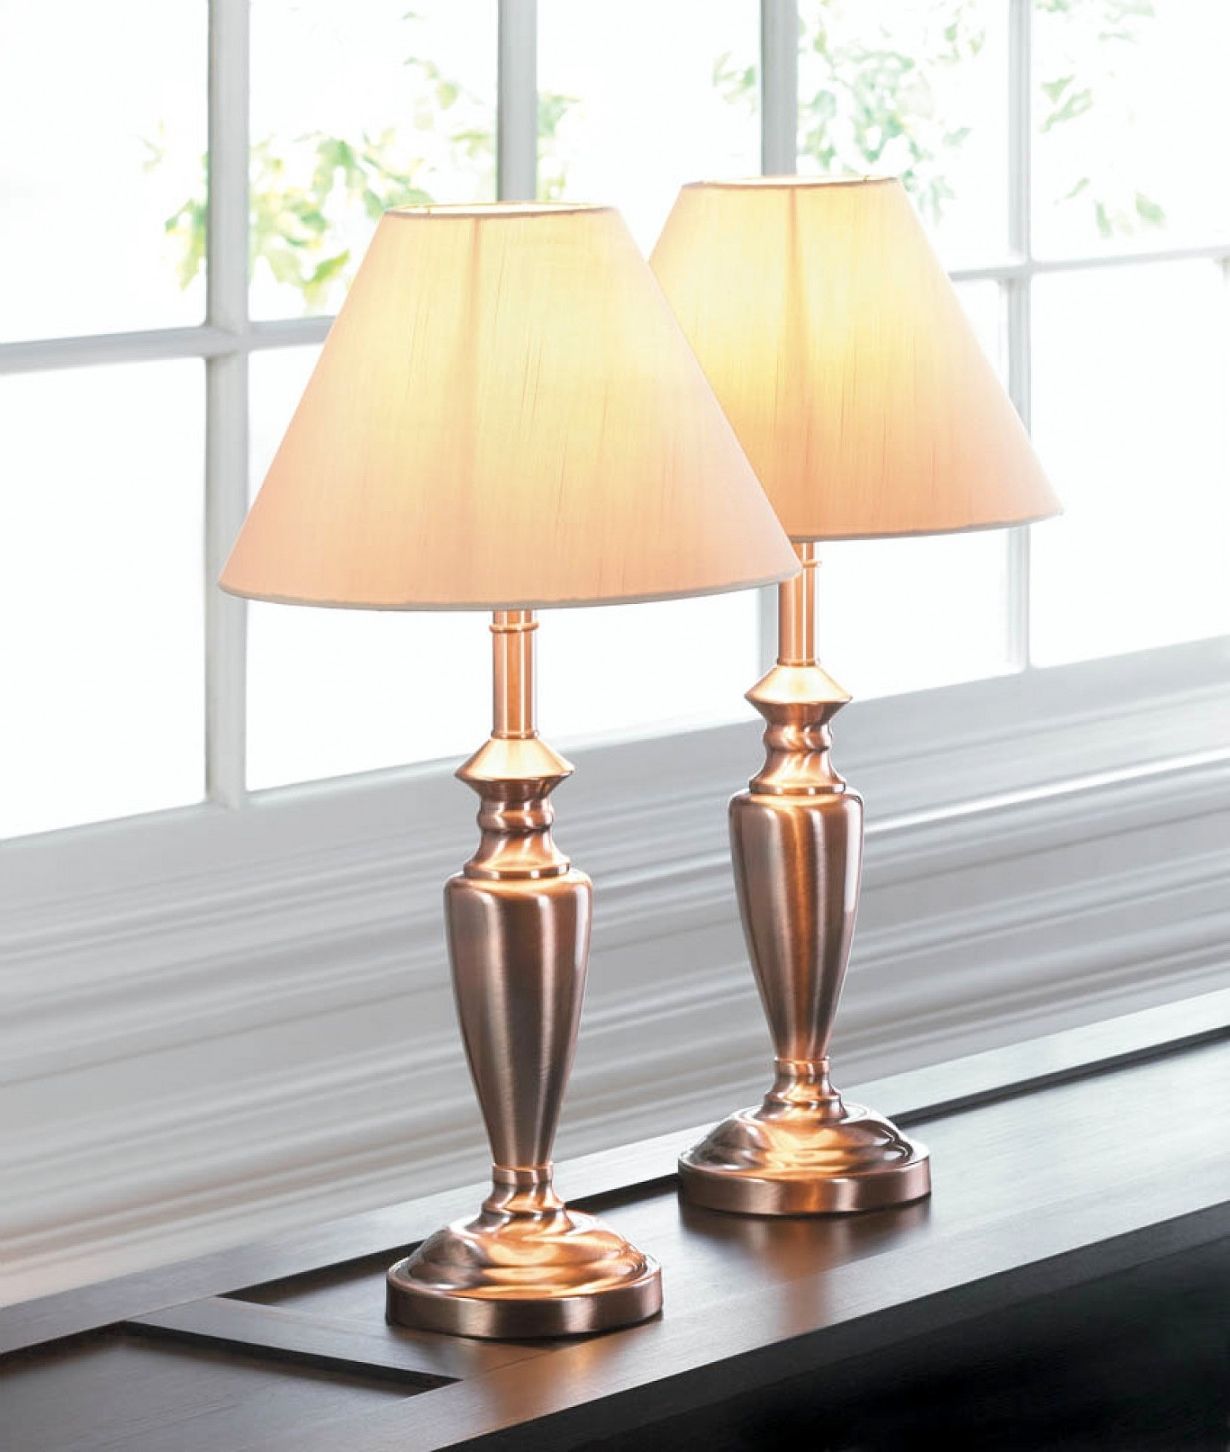 Wayfair Living Room Table Lamps Throughout Best And Newest Marvelous Decoration Wayfair Lamps For Living Room Wayfair Lamps For (View 11 of 20)